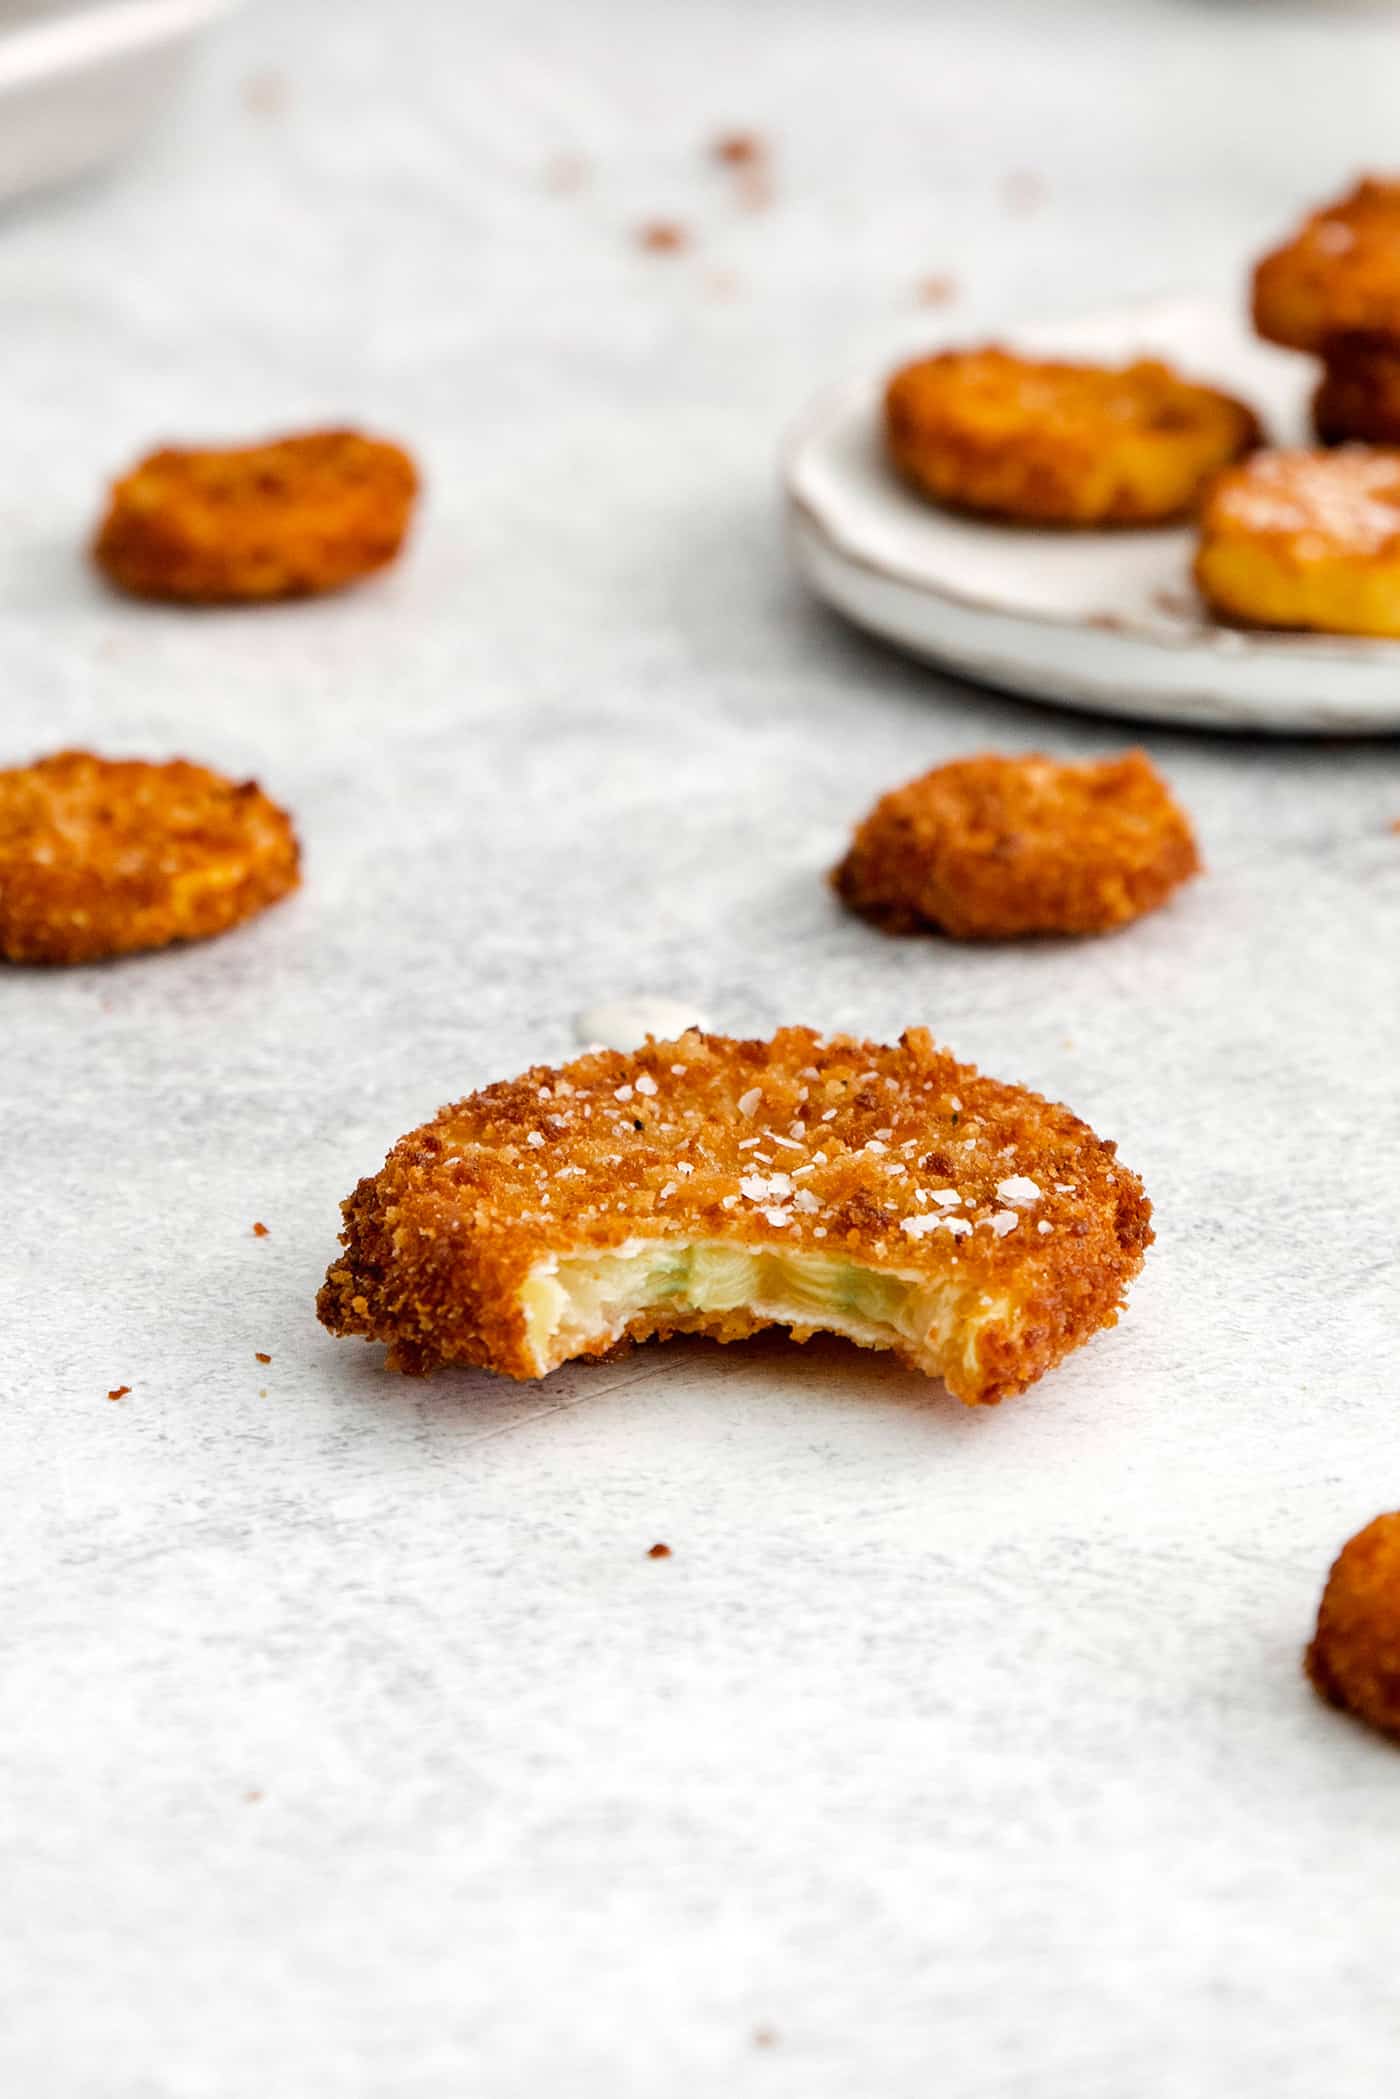 A fried squash round with a bite missing